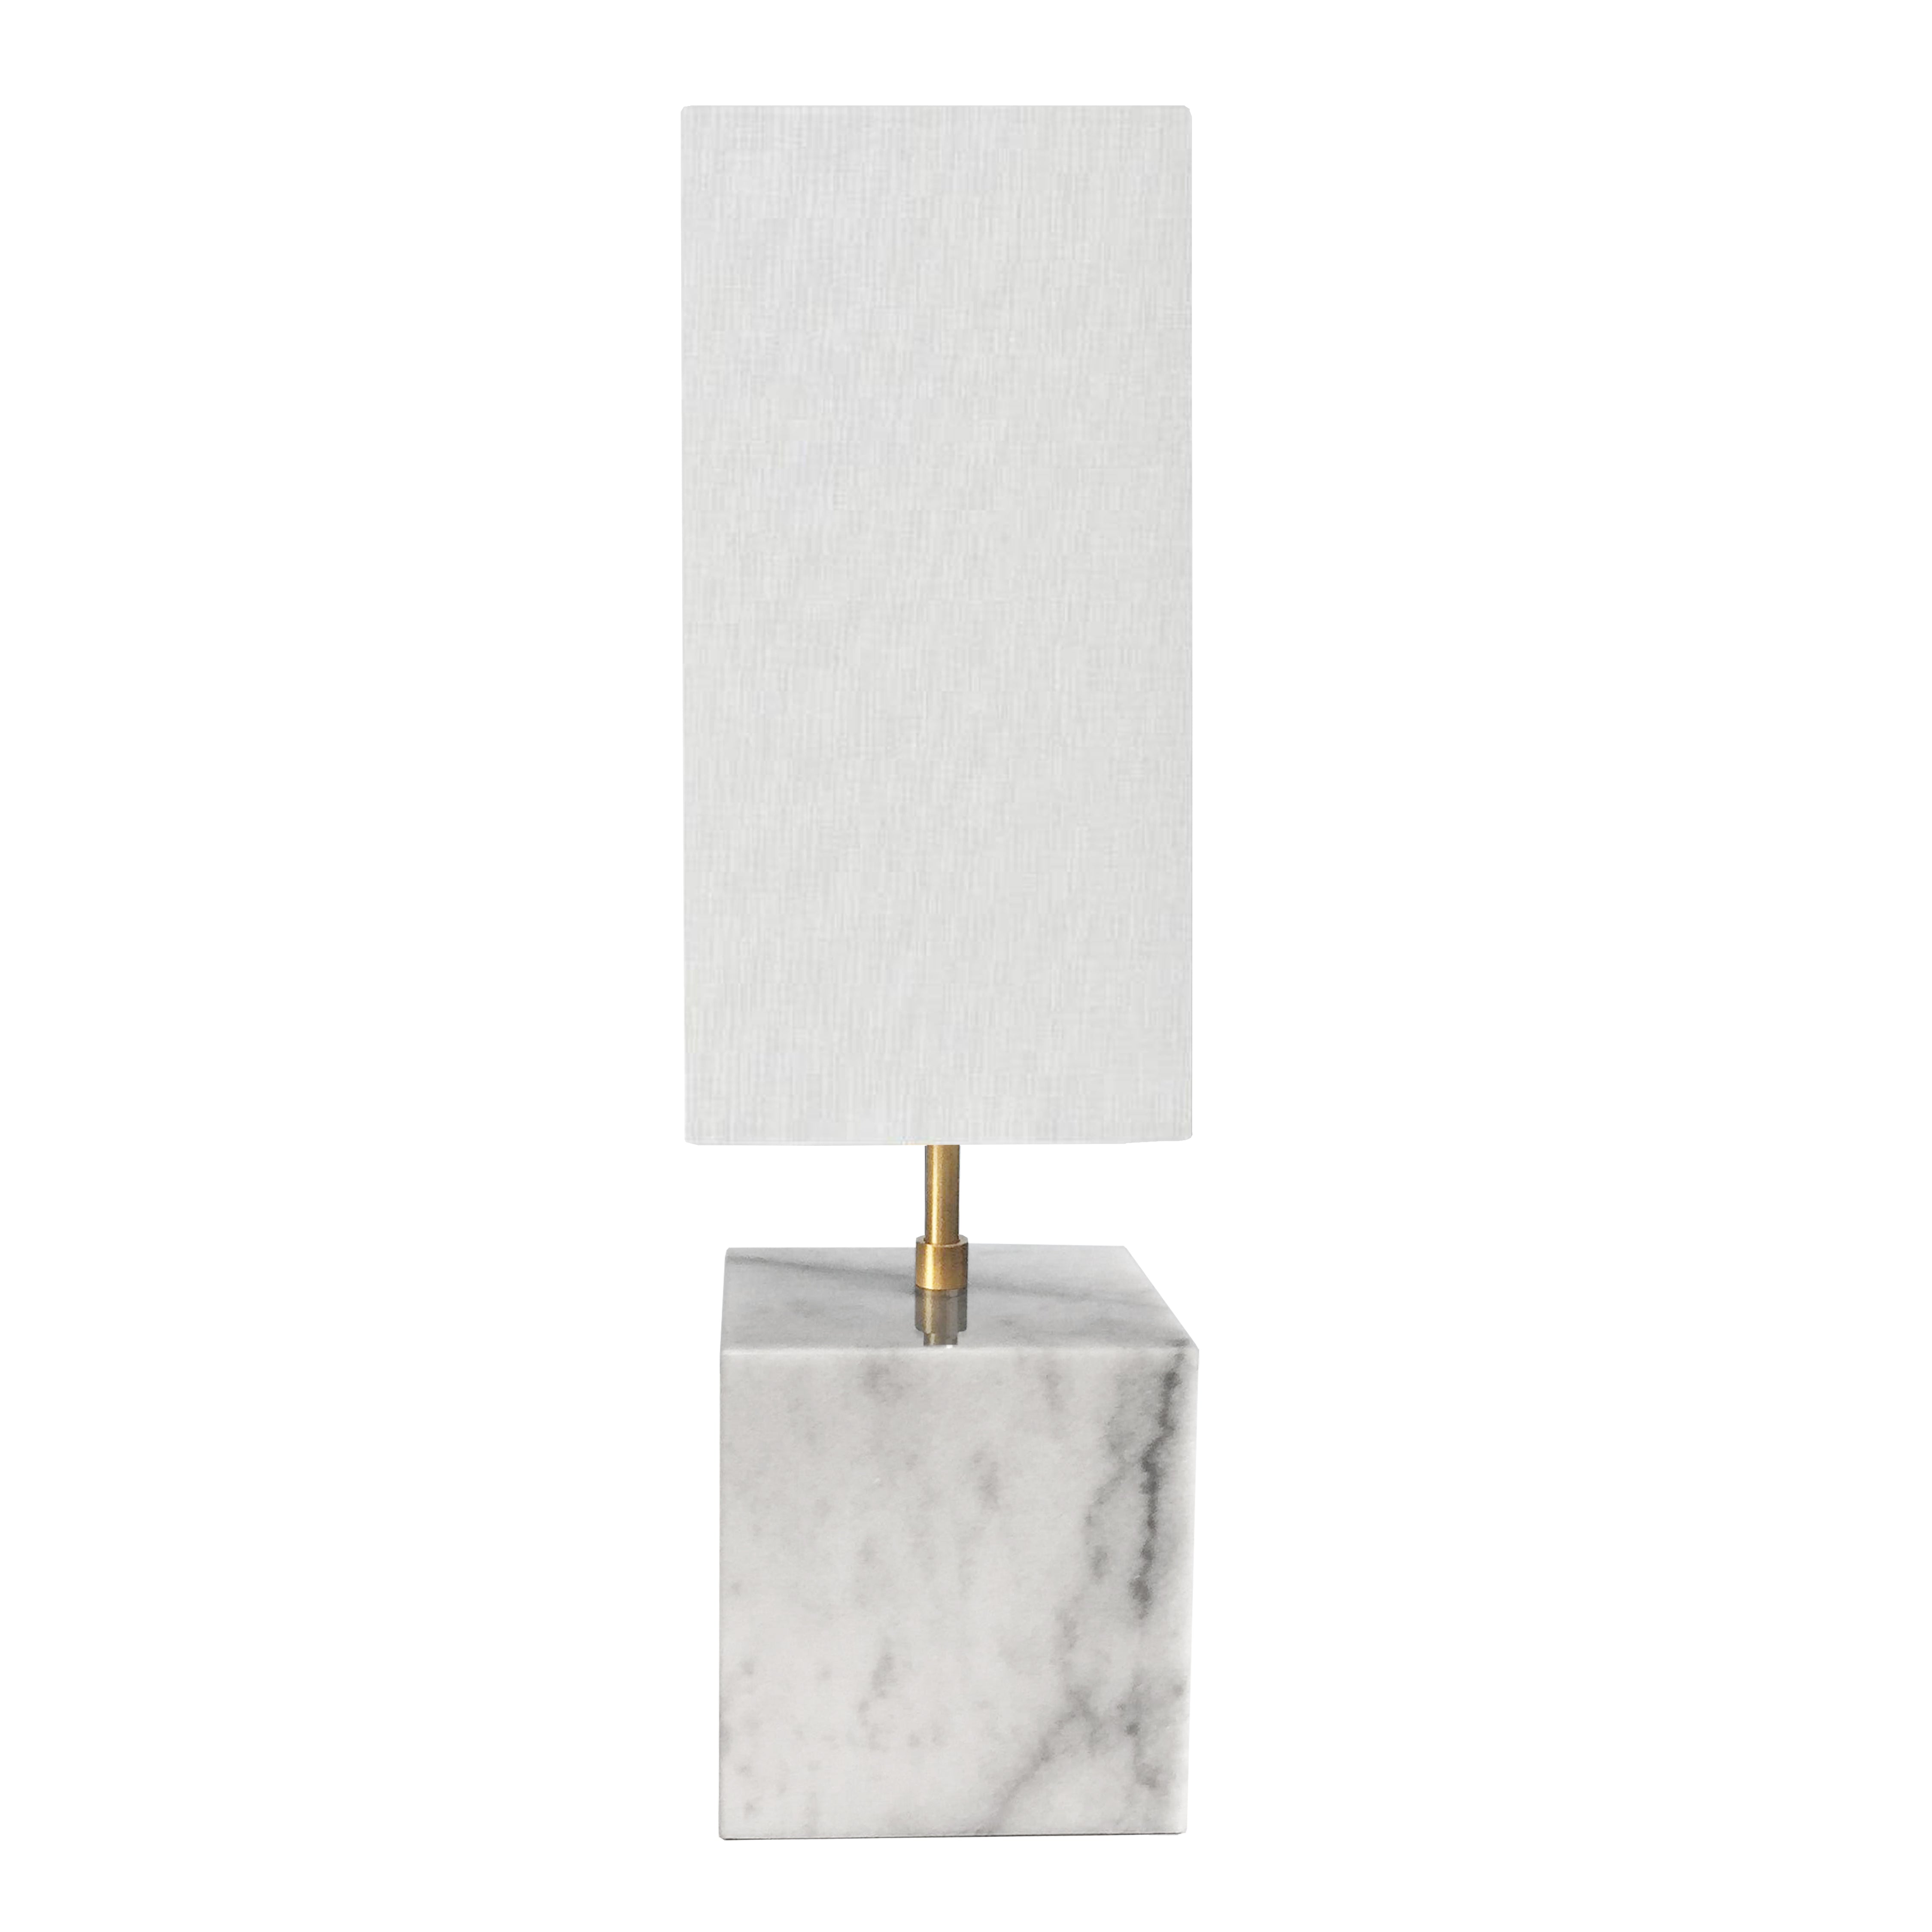 TODD Lampe sur table Blanc - TOD-221T-WH-AGB | DAINOLITE